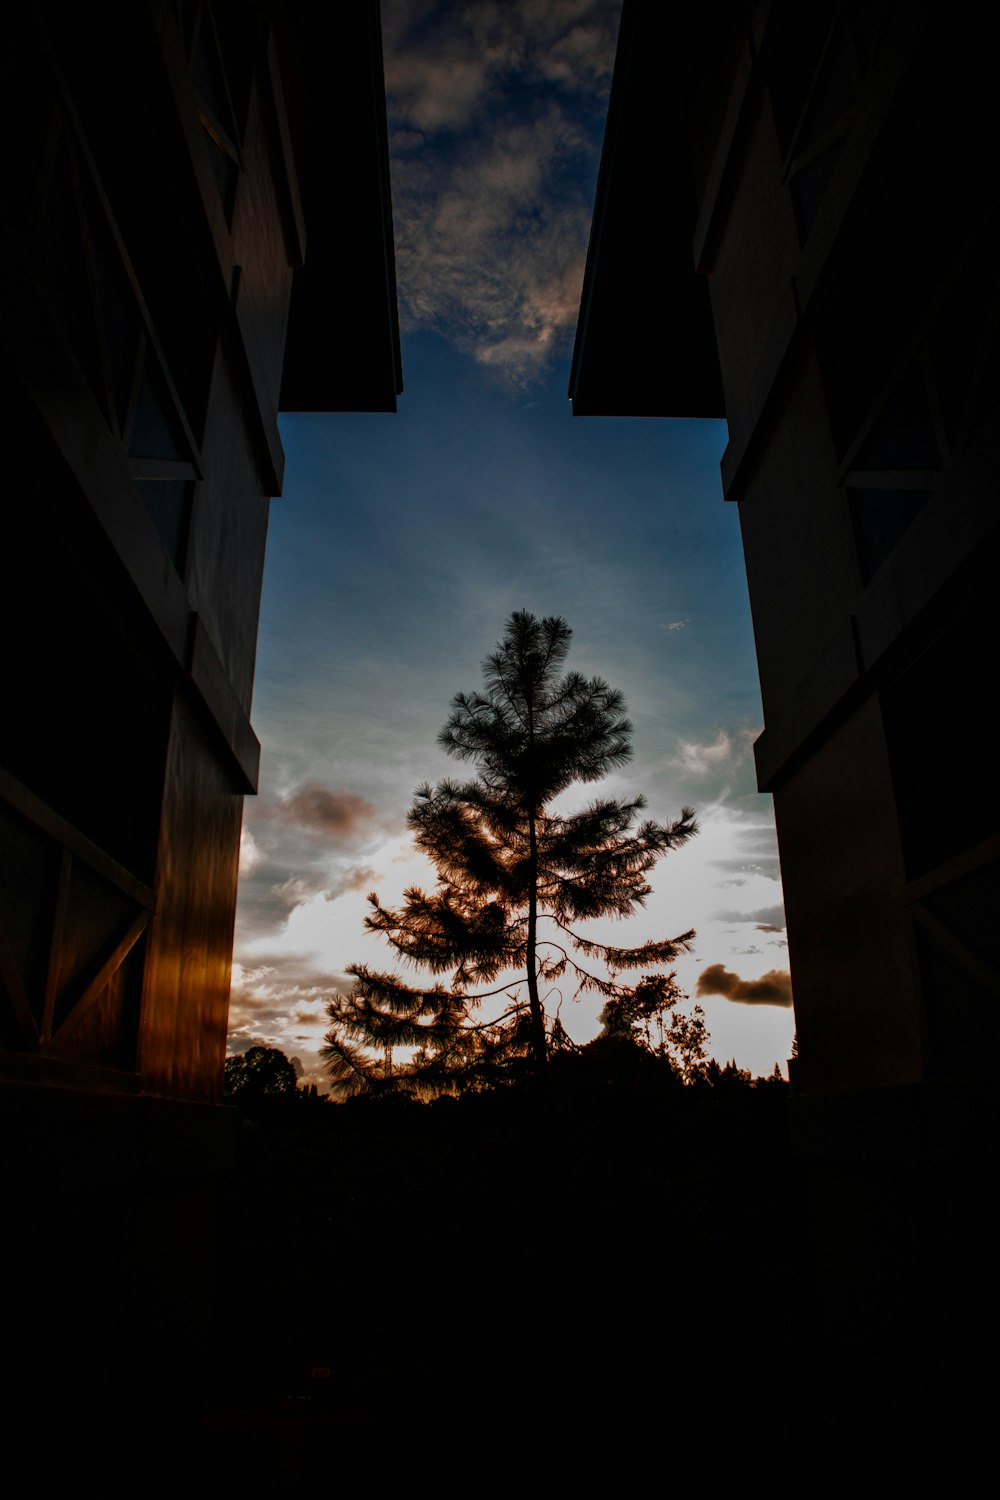 a view of a tree through two windows